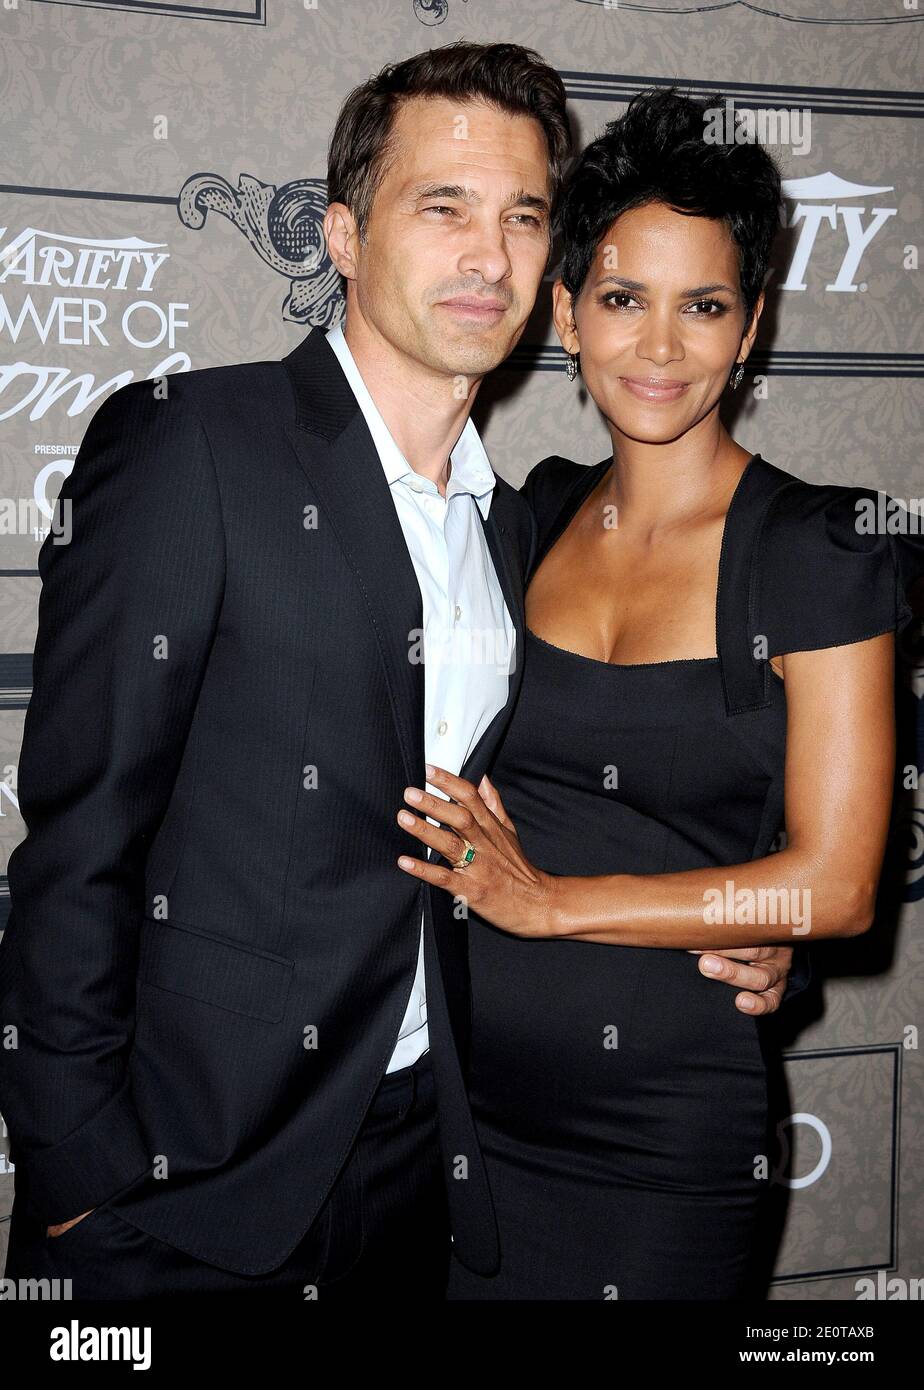 How many husbands has halle berry had?